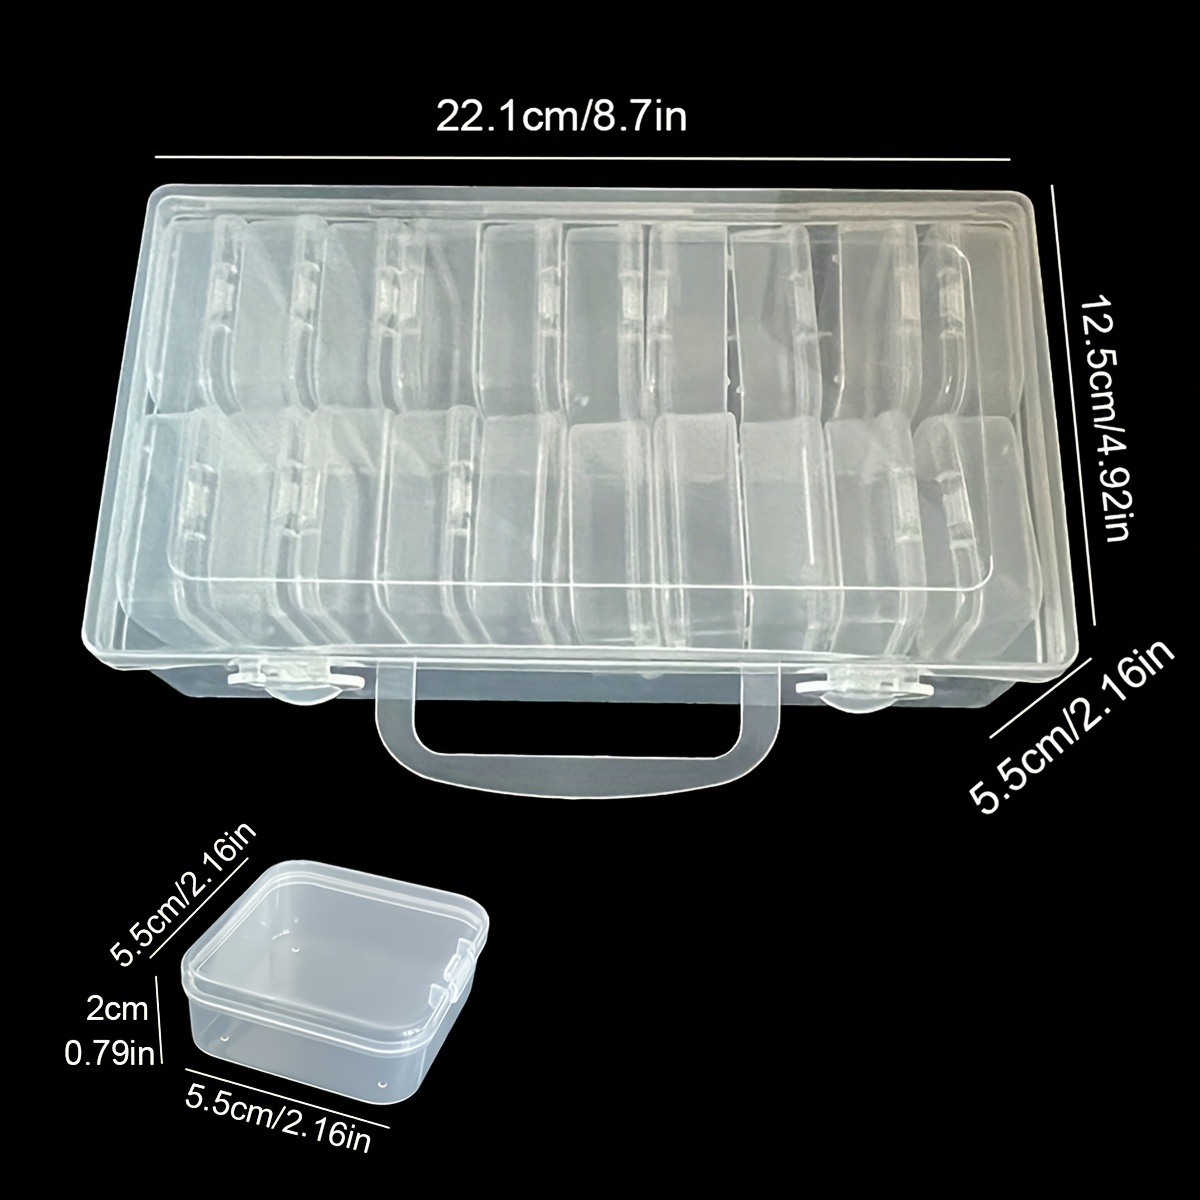  SEWACC Nail Kit Tools Beads Loose Bead Container Earring  Container Bead Case with Lids Button Case Bead Storage Containers Bead  Holder Organizer Bead Box Plastic Divider Desktop Jewlery